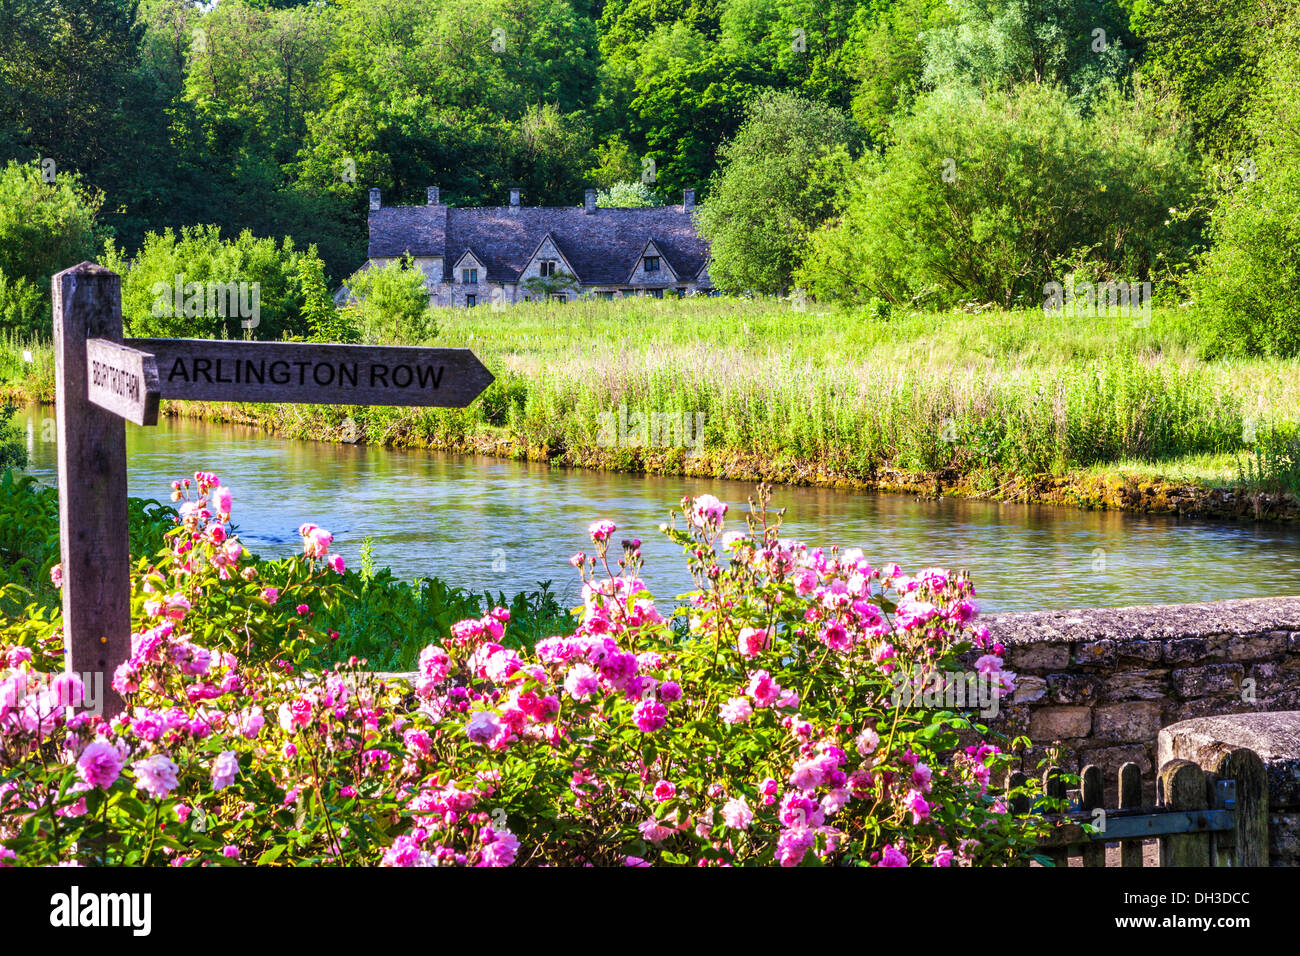 Row of weavers' cottages, Arlington Row, in Bibury, Gloucestershire viewed across the River Coln and the Rack Isle water meadow. Stock Photo